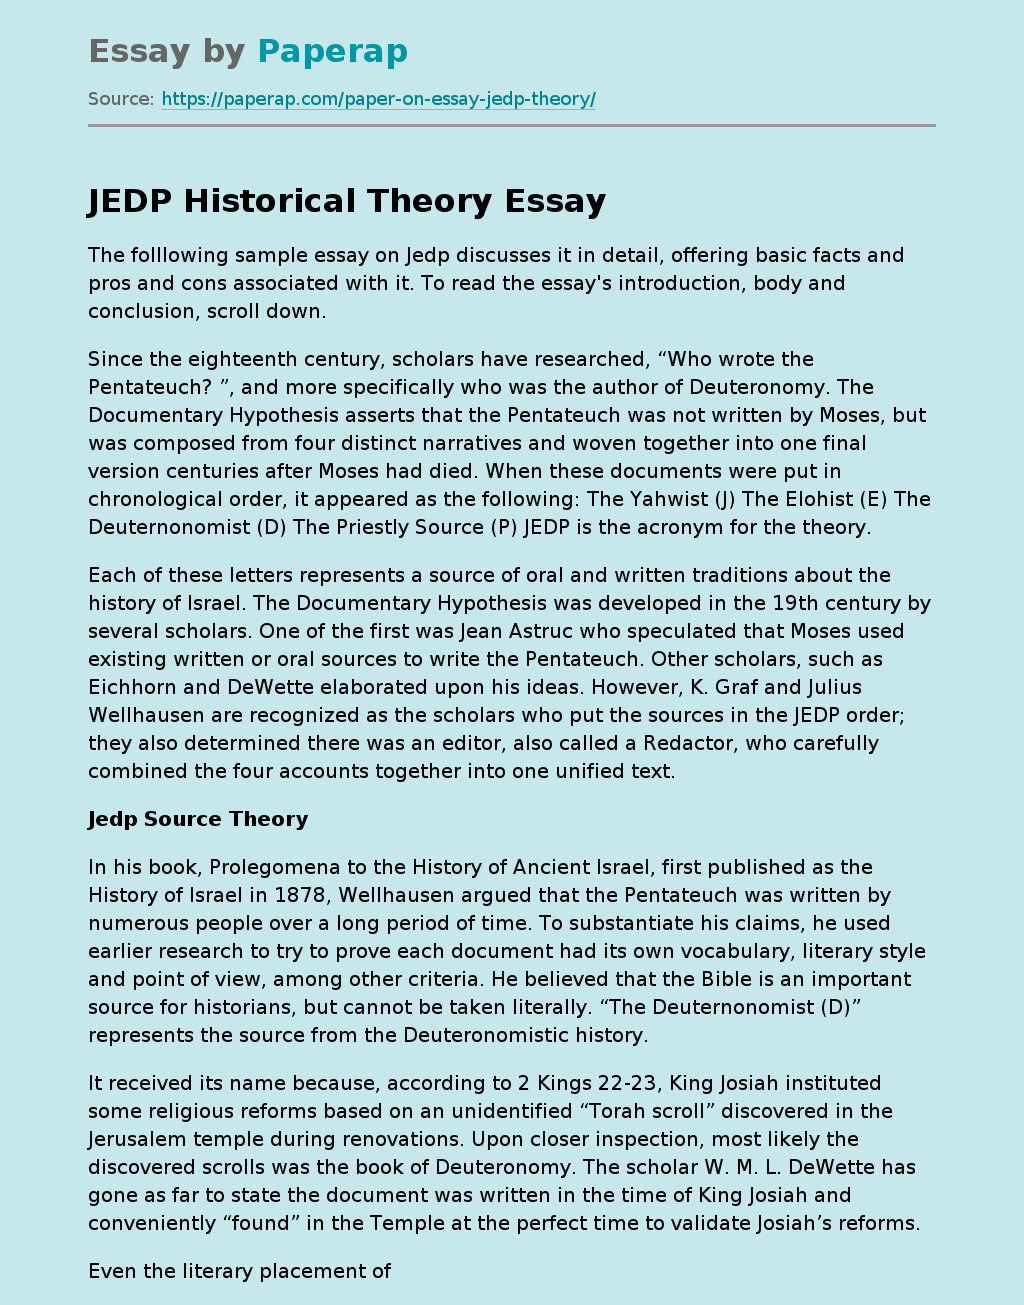 JEDP Historical Theory